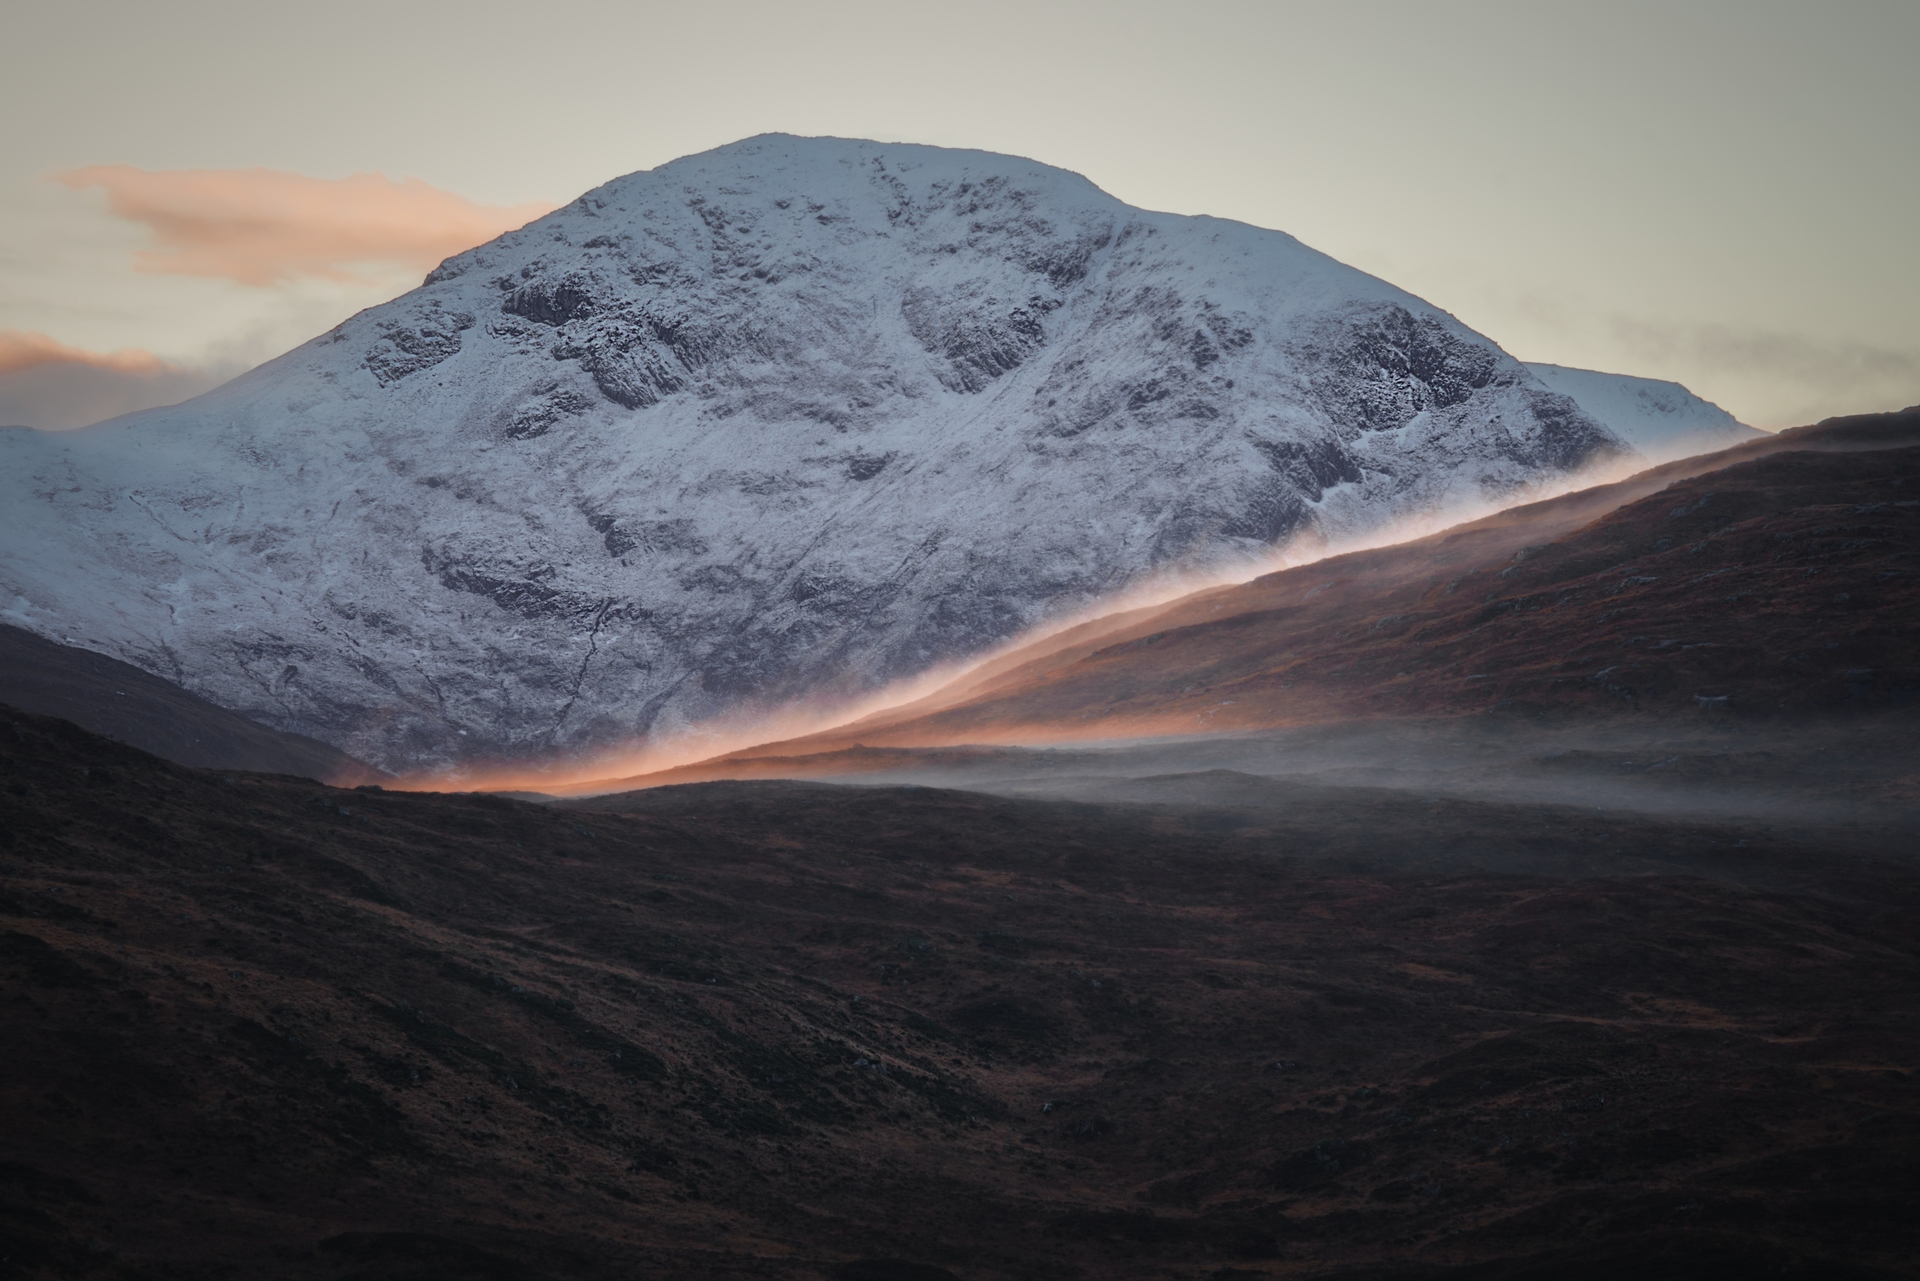 Ice and fire: Rannoch Moor on Tuesday.